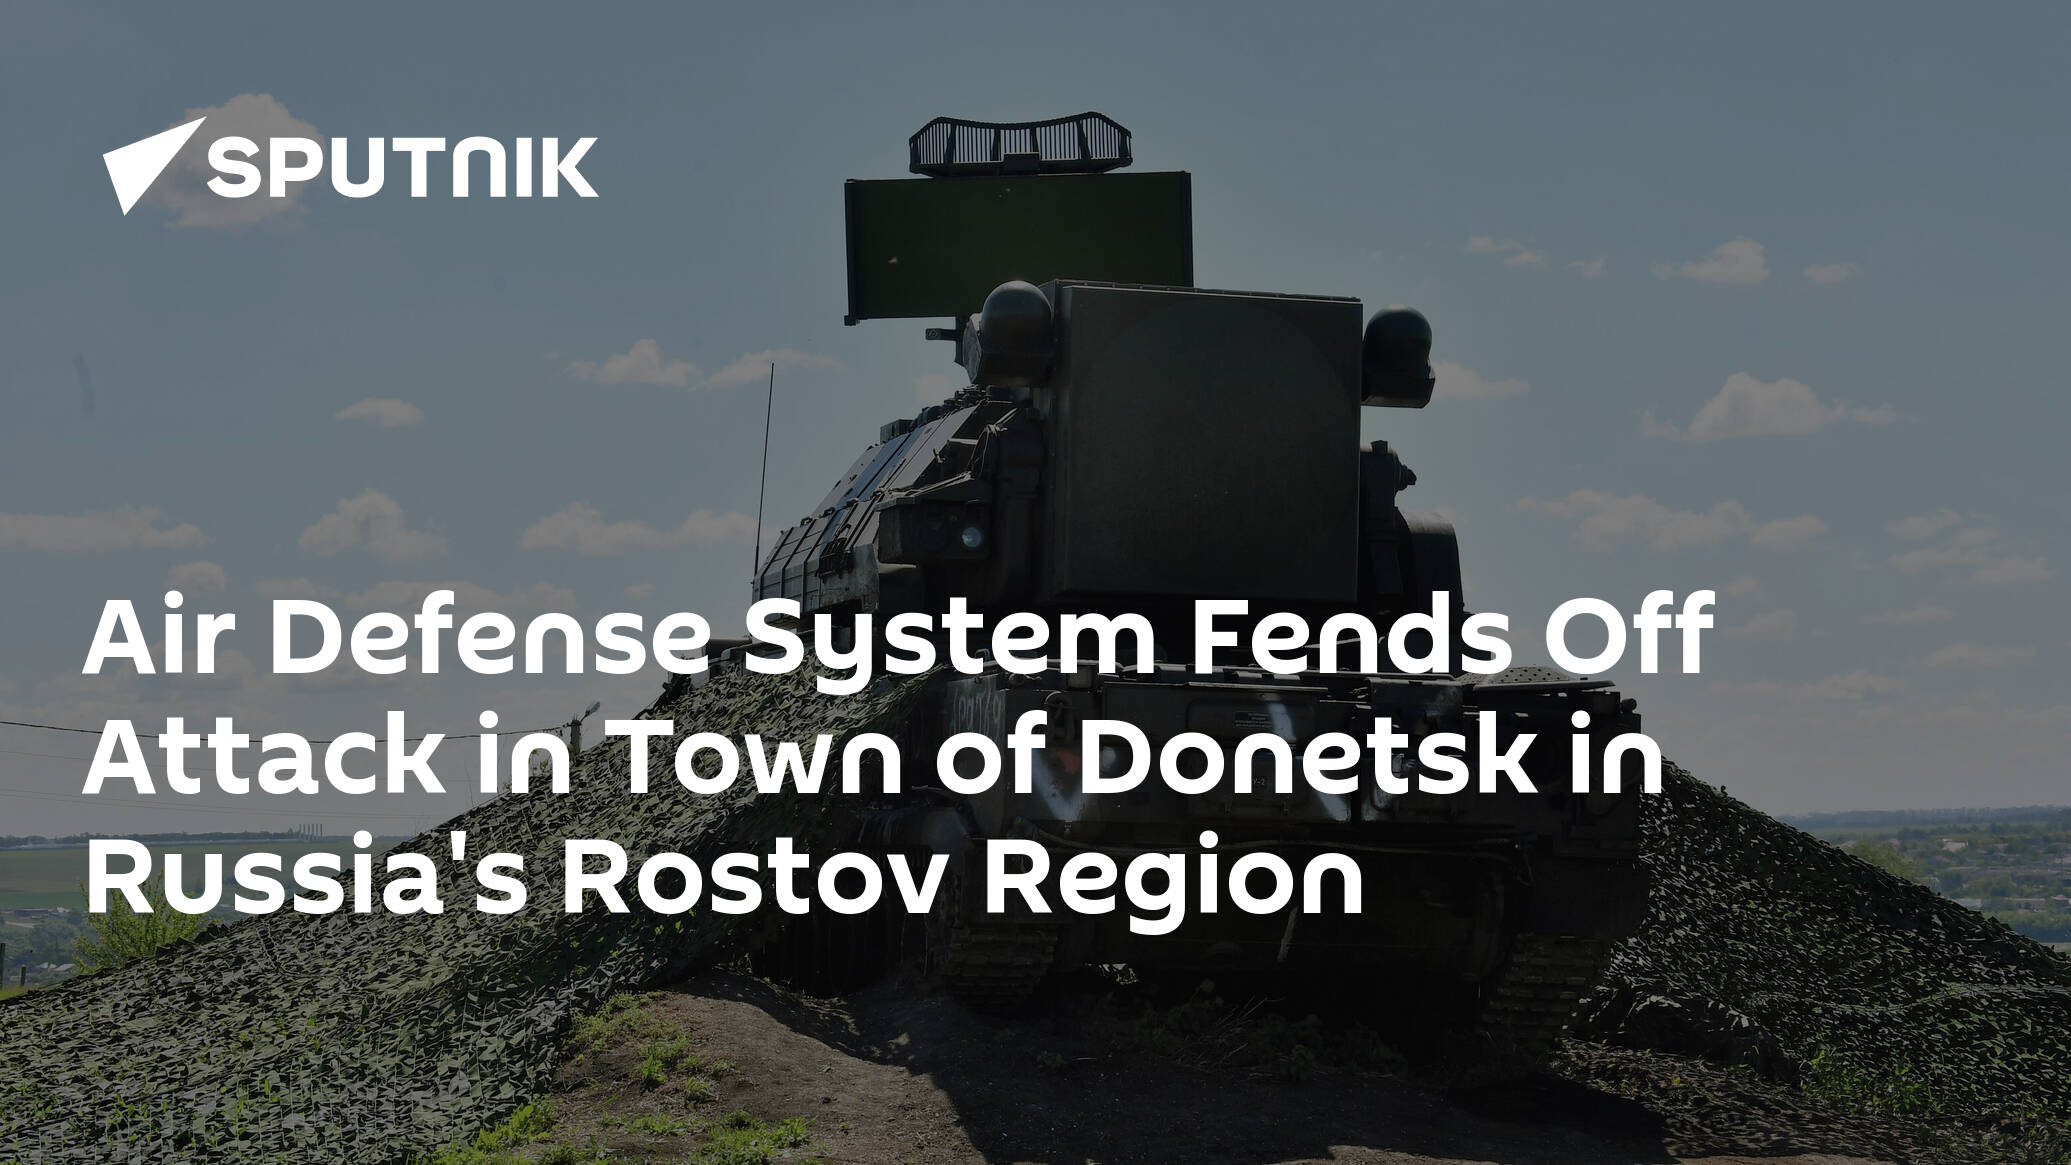 Air Defense System Fends Off Attack in Town of Donetsk in Russia's Rostov Region